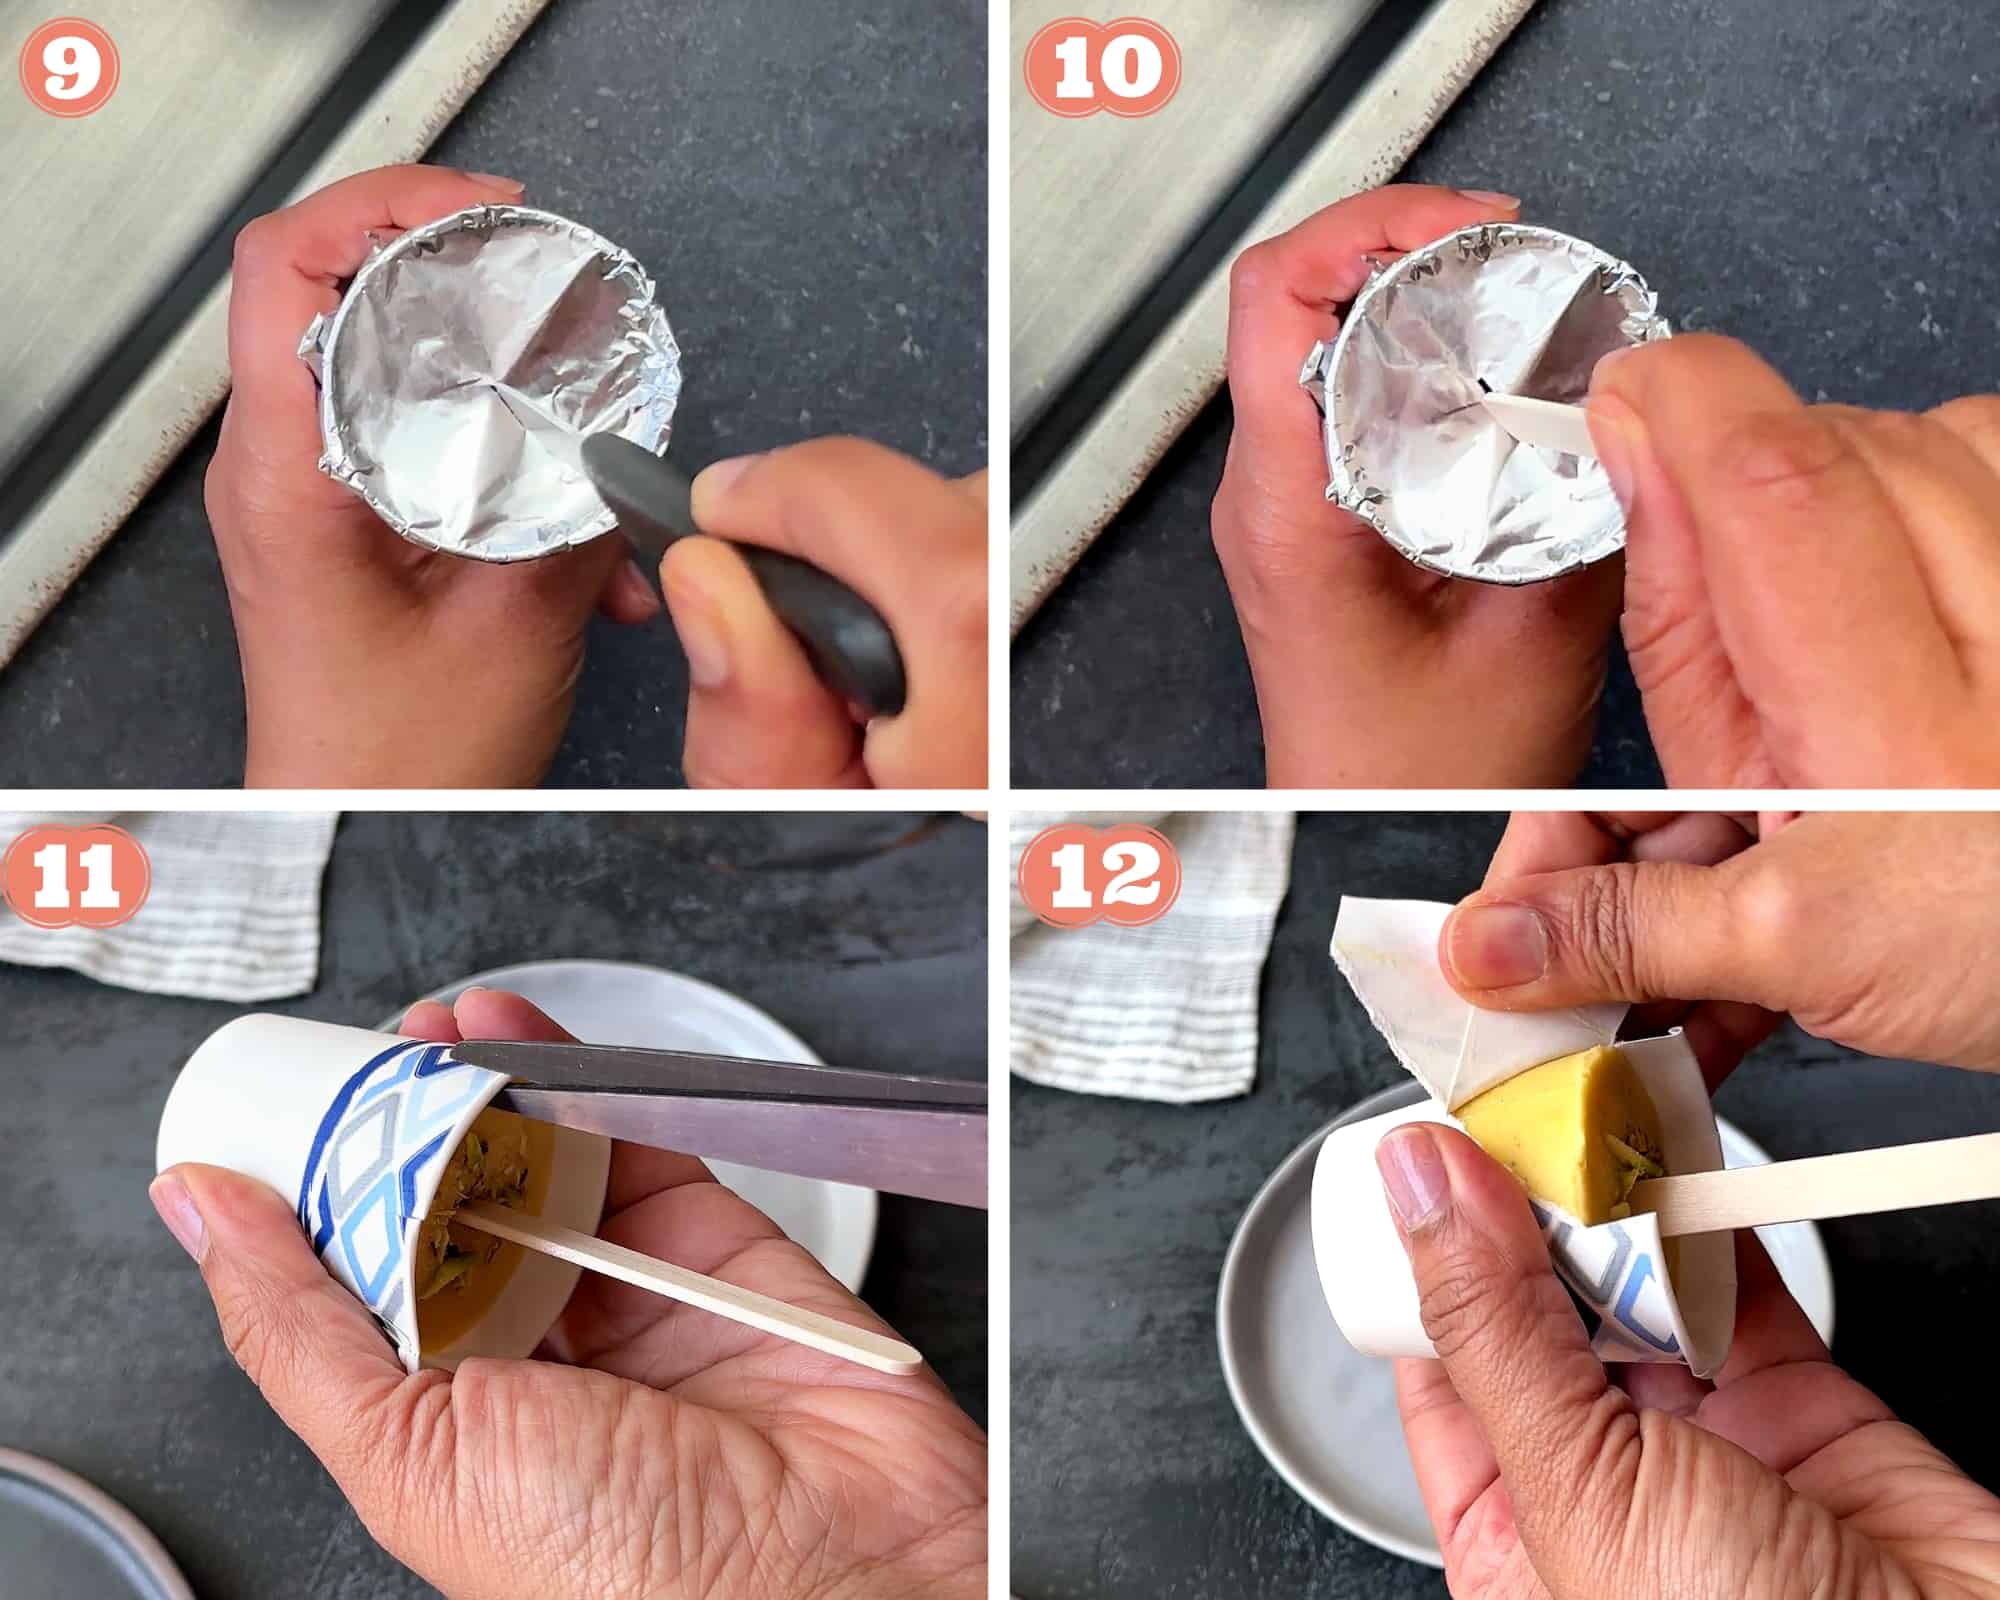 4-image grid showing how to insert ice cream stick in cup, them cut and peel it off